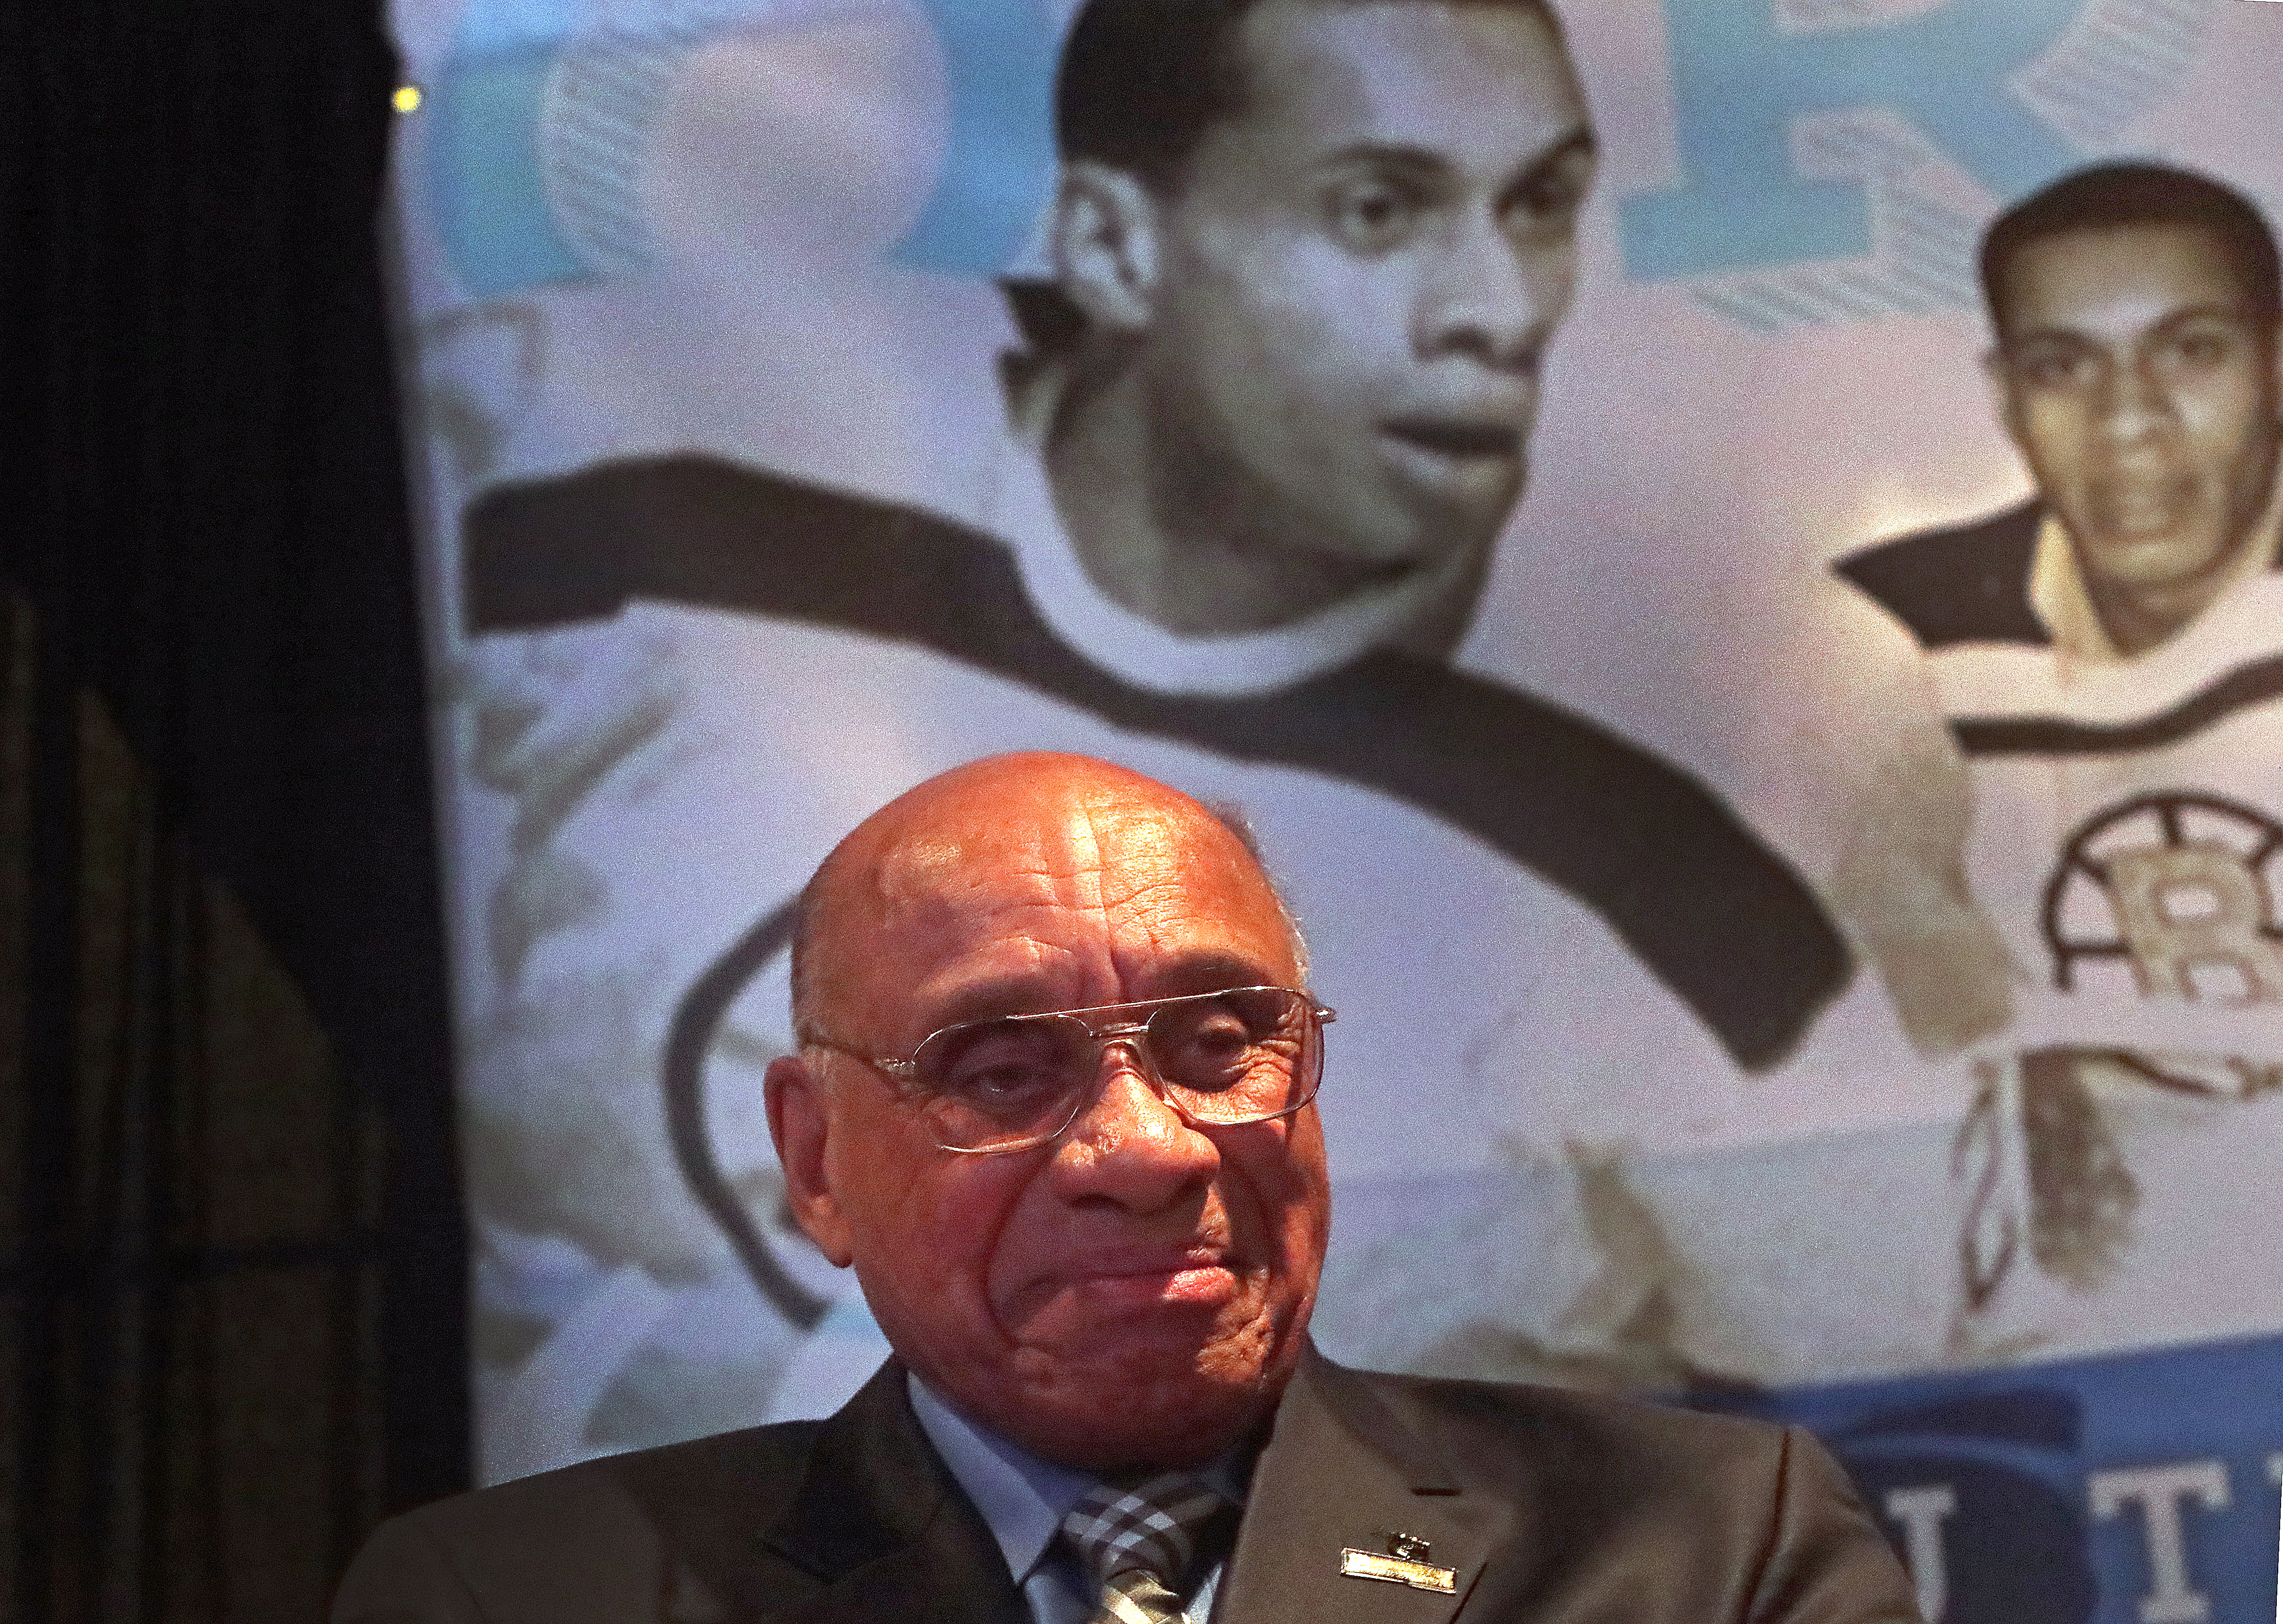 Willie O'Ree's Legacy Grows As Hockey Pushes To Expand Its Roots